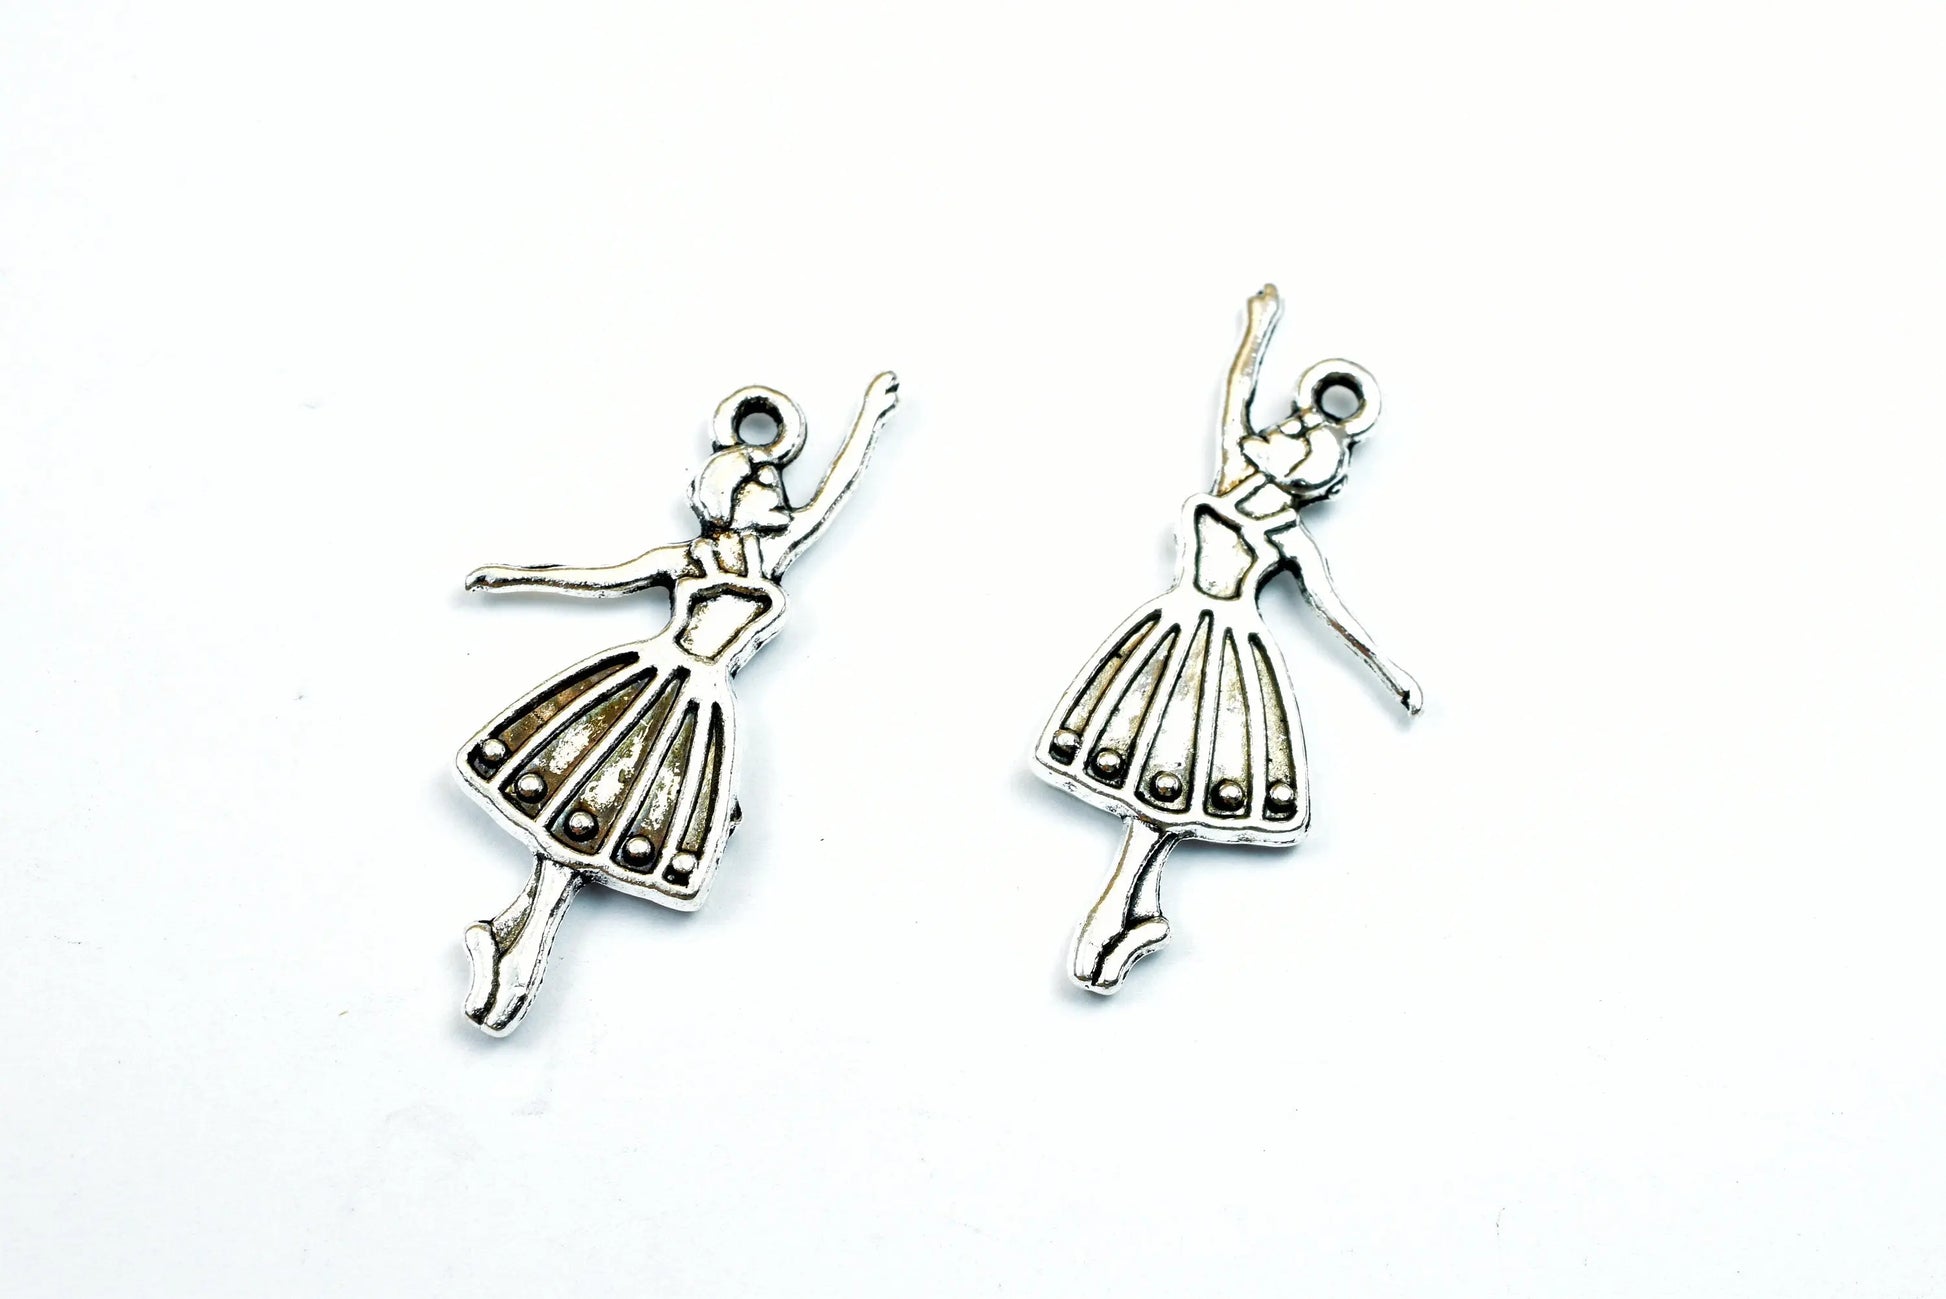 Ballet Dancer Charms Pendant Size 32x15mm Silver Color Charm Pendant Finding For Jewelry Making 8PCs/PK - BeadsFindingDepot